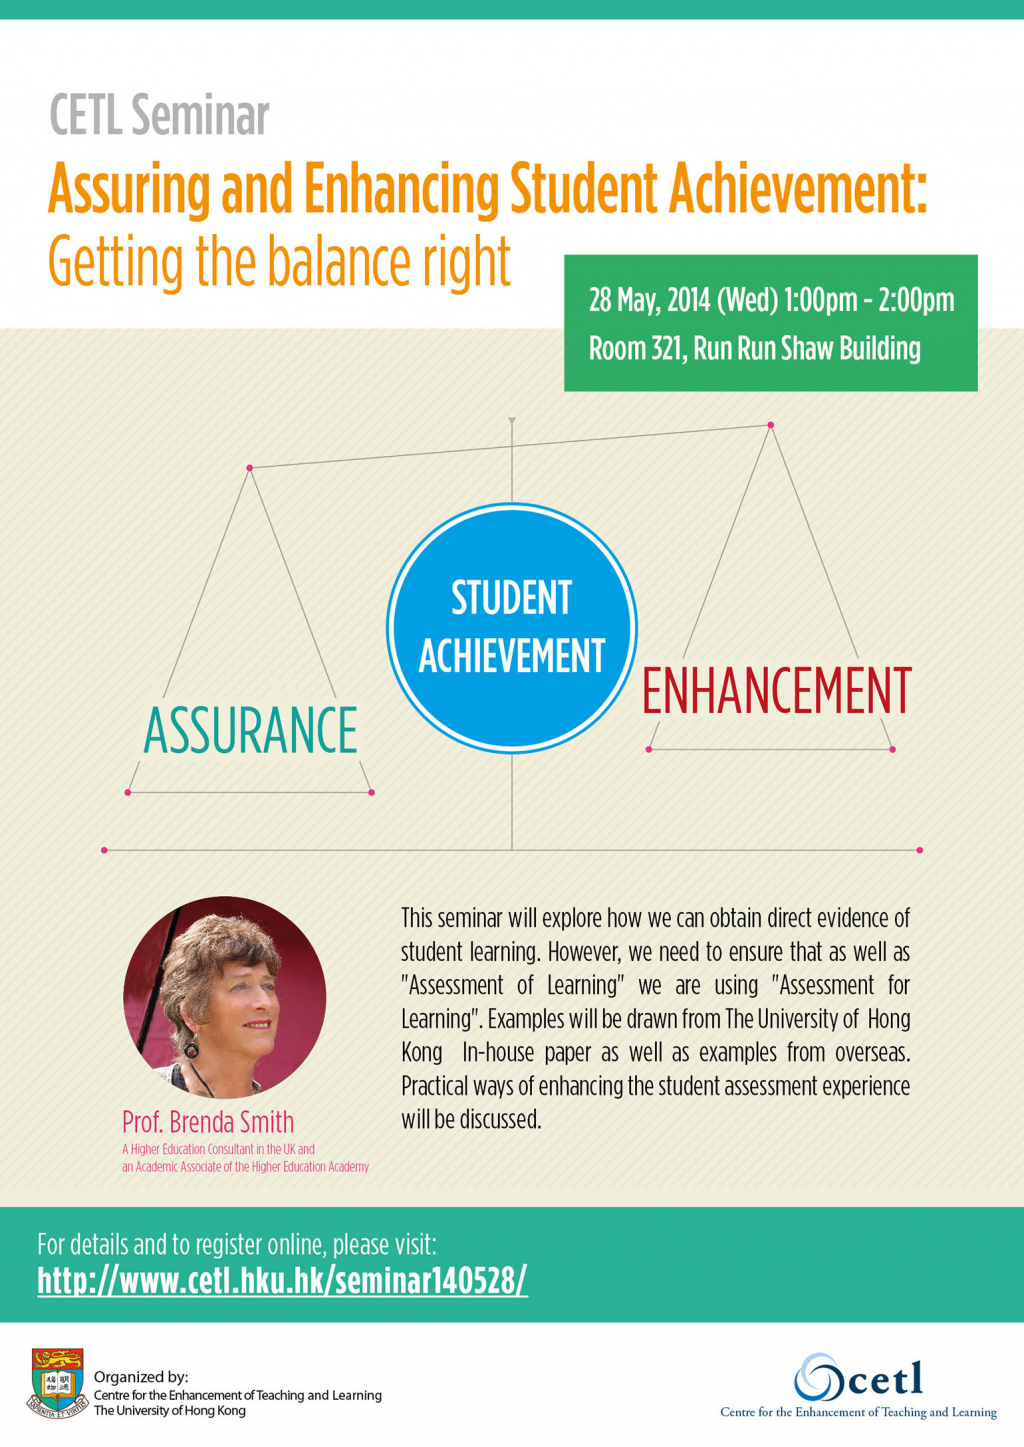 CETL Seminar – 'Assuring and Enhancing Student Achievement: Getting the balance right' by Professor Brenda Smith, U.K.